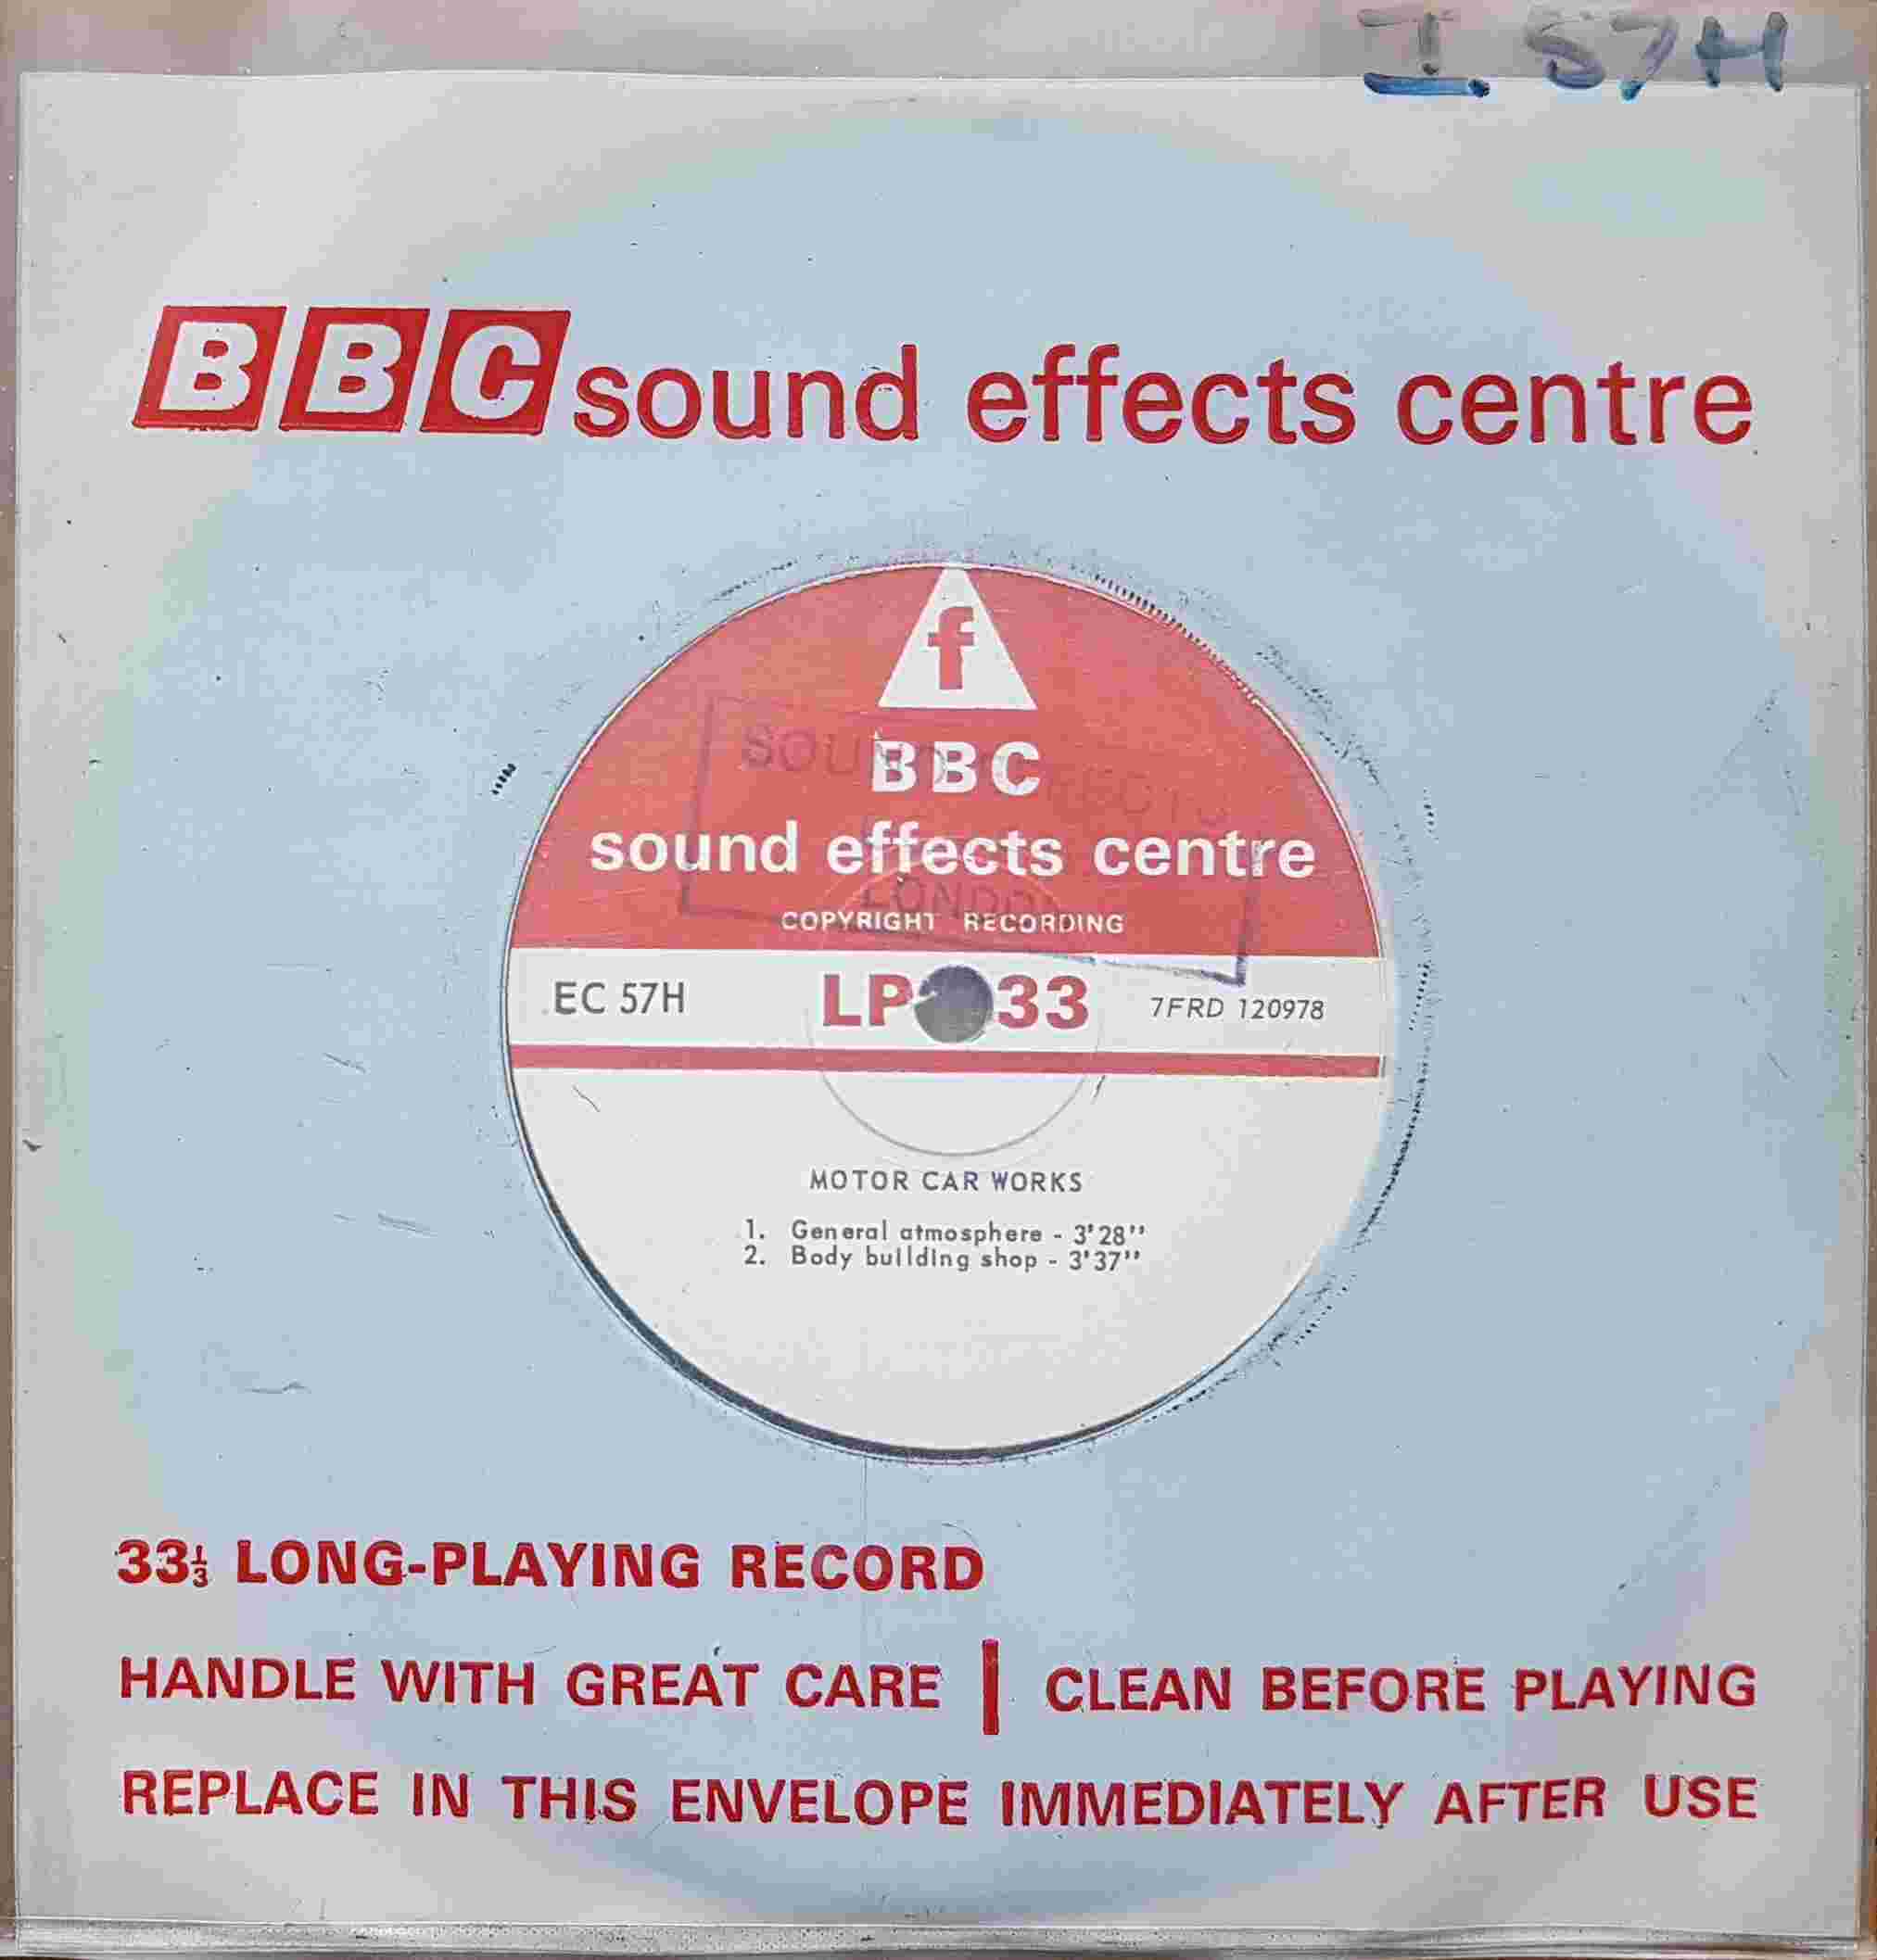 Picture of EC 57H Motor car works by artist Not registered from the BBC singles - Records and Tapes library